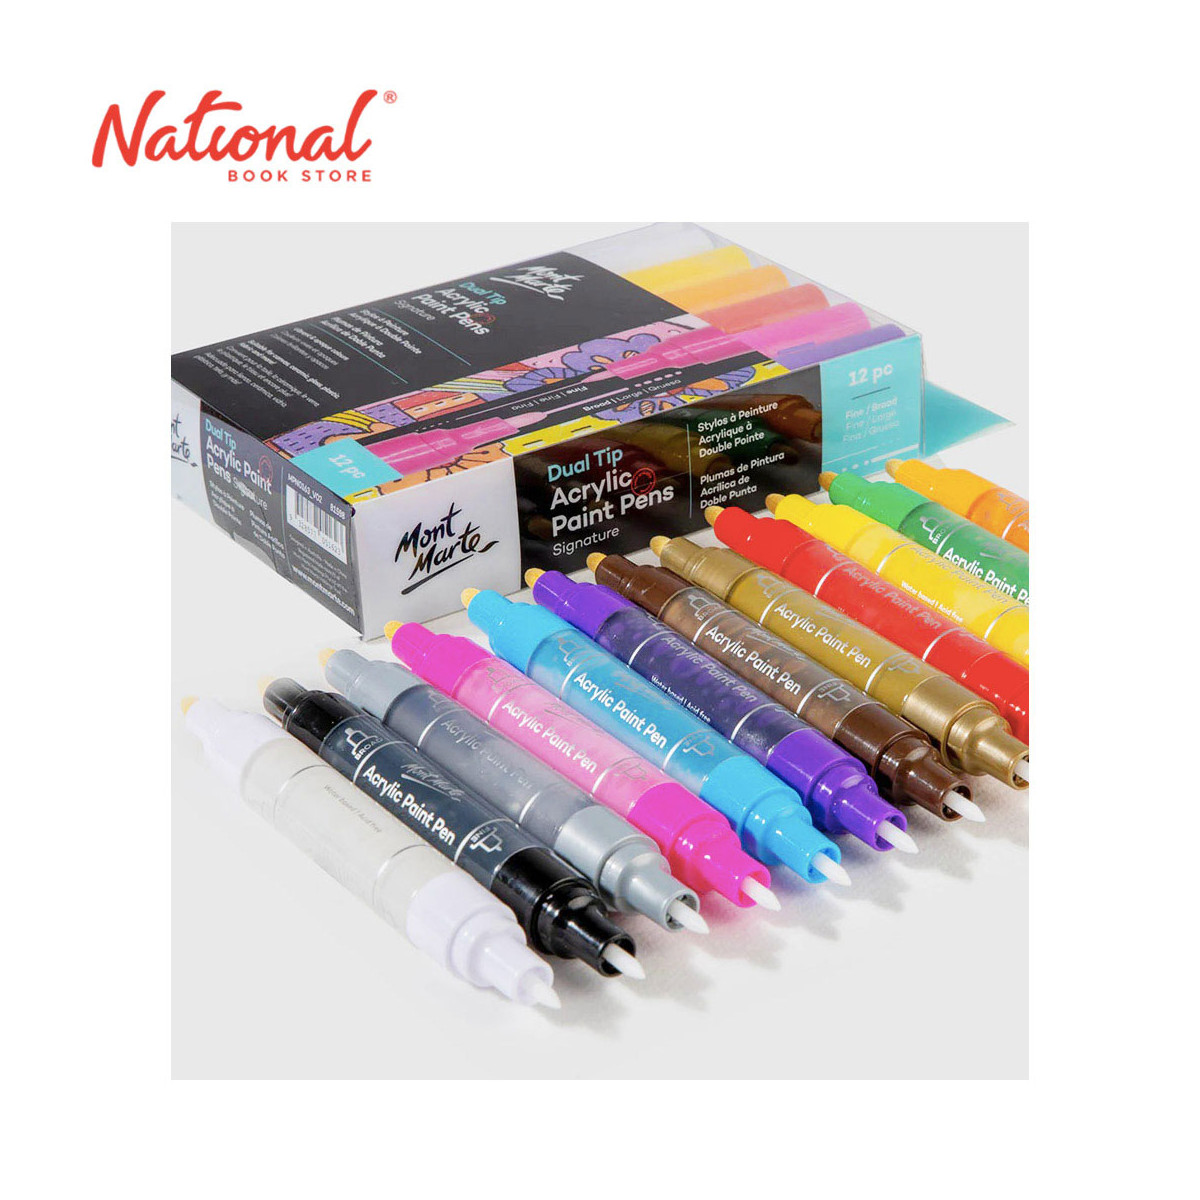 Leisure Arts Dual Ended Calligraphy Markers Set 12pc